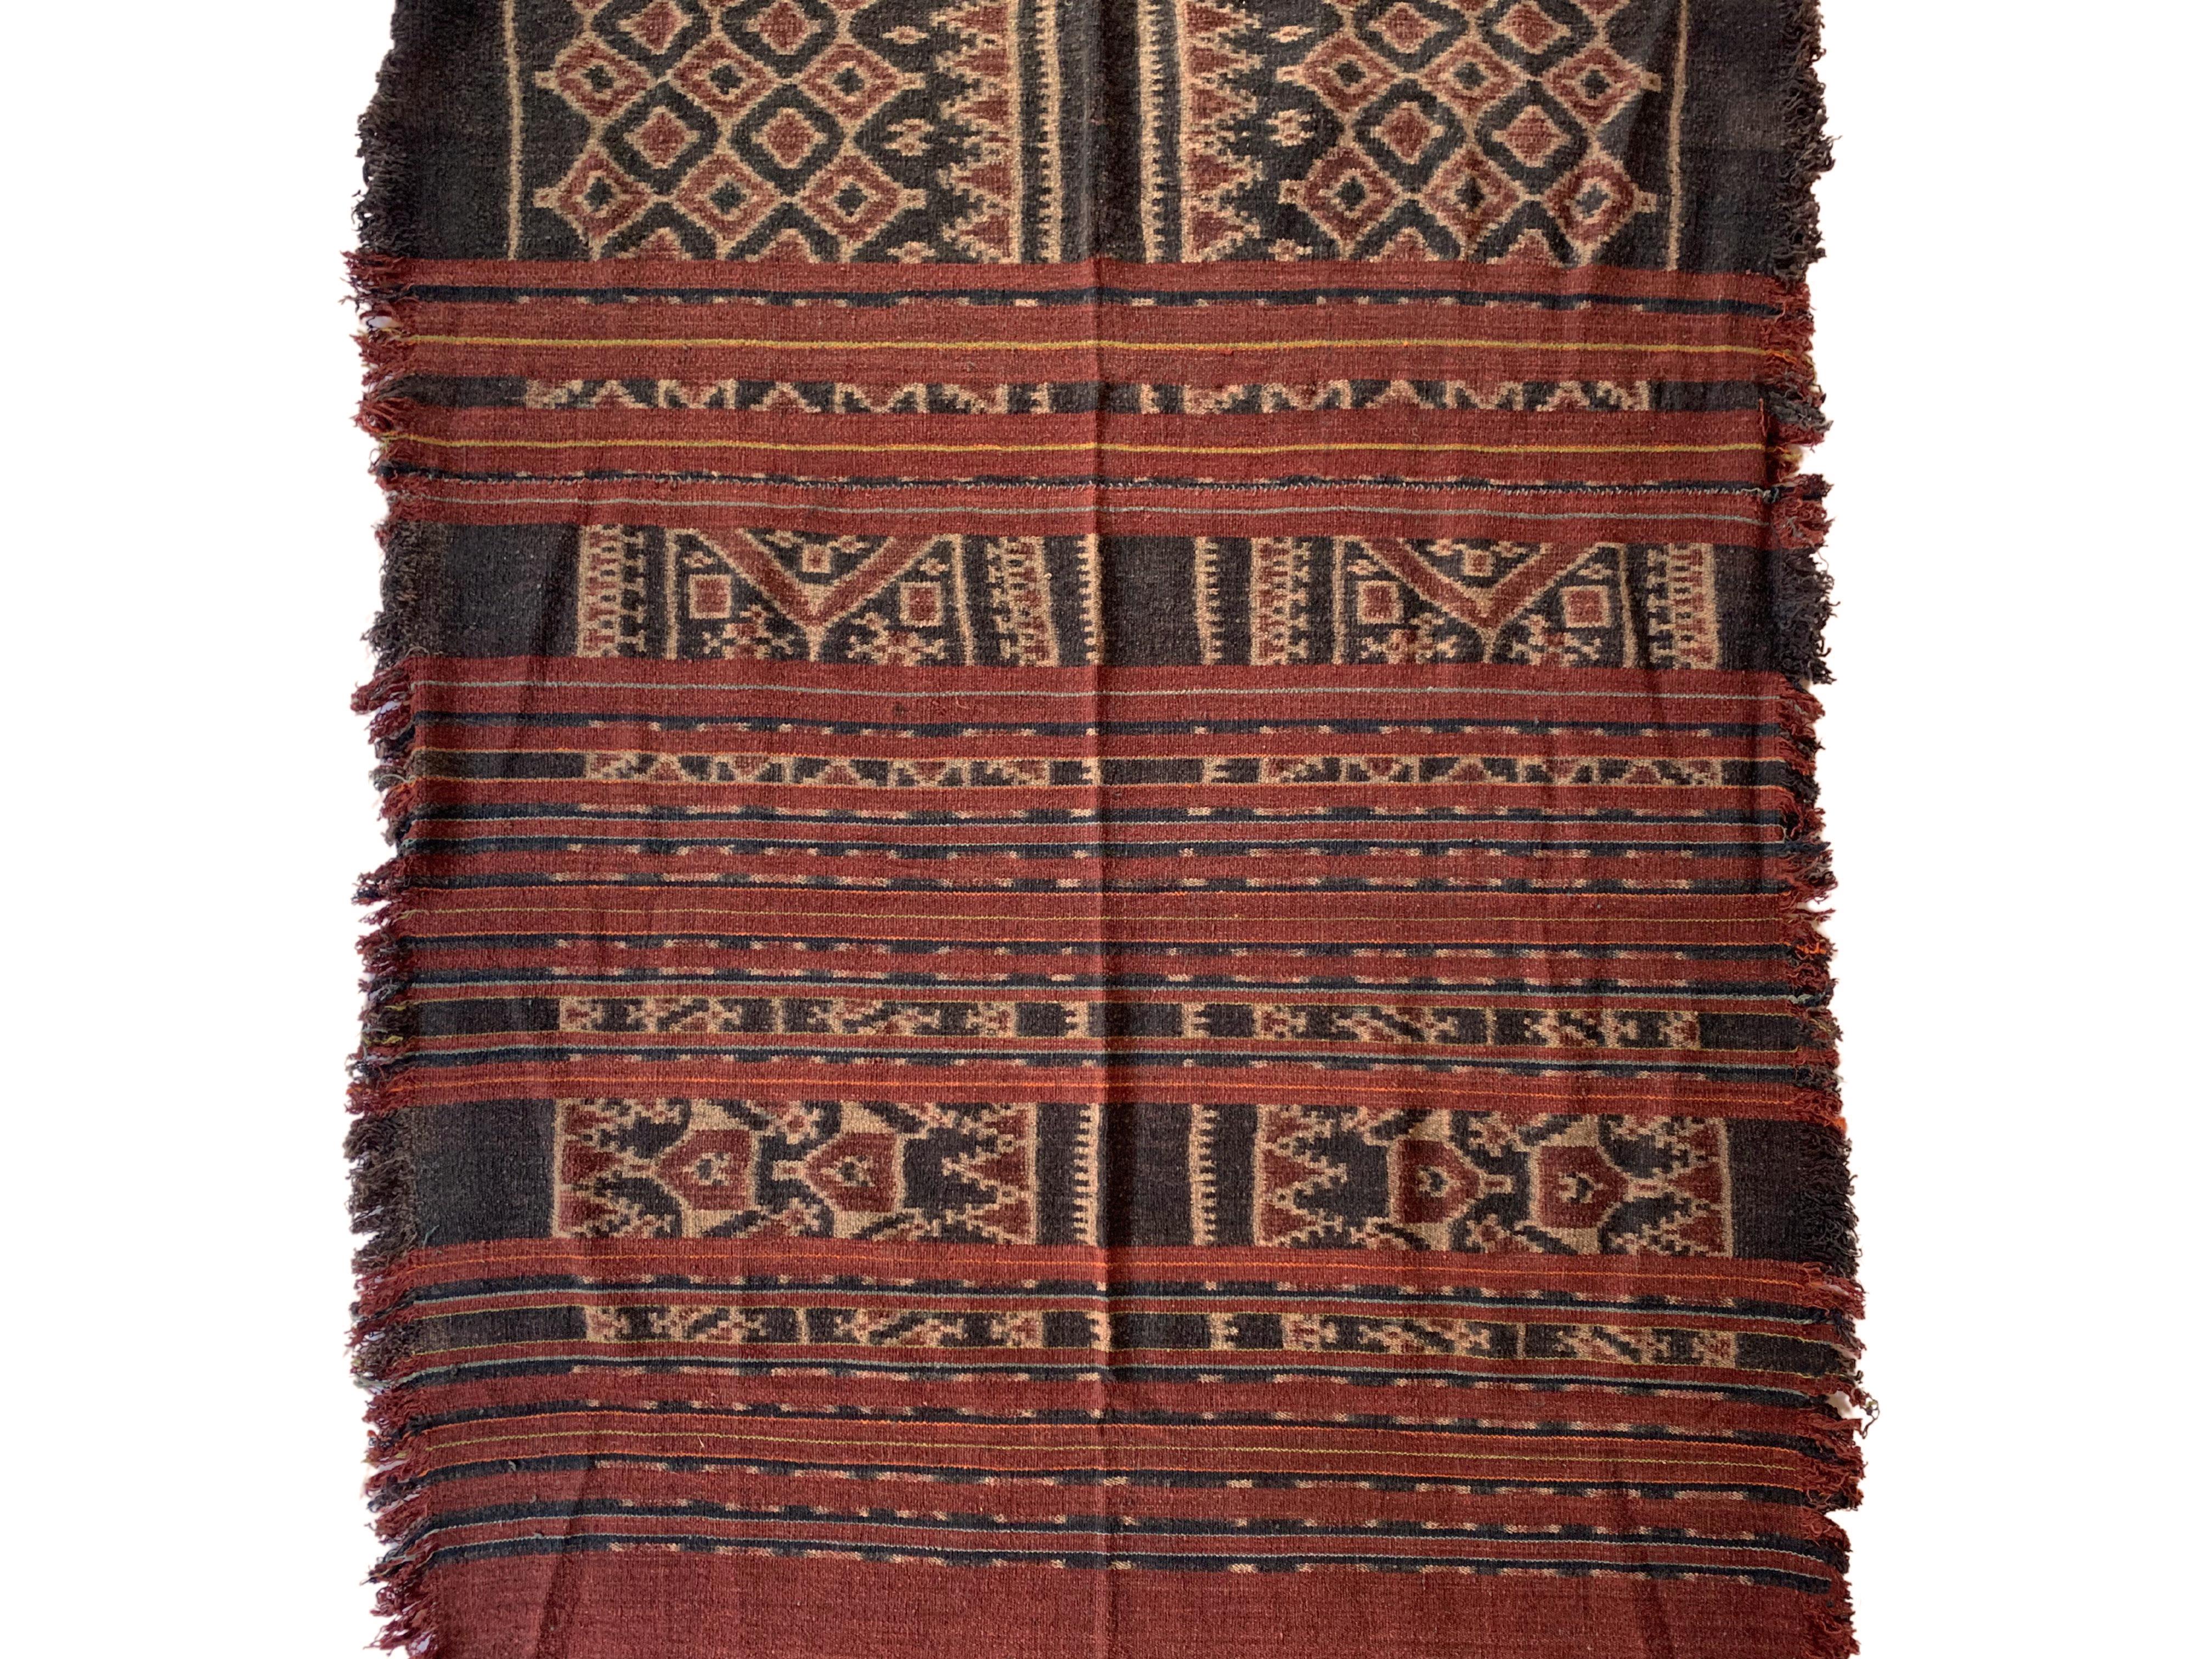 A large Ikat Textile from the Toraja tribes of Sulawesi, Indonesia. The Toraja tribes people are an ethnic and cultural group of people who occupy the mountainous highlands of South Sulawesi, Indonesia. Famous for their unique architecture and